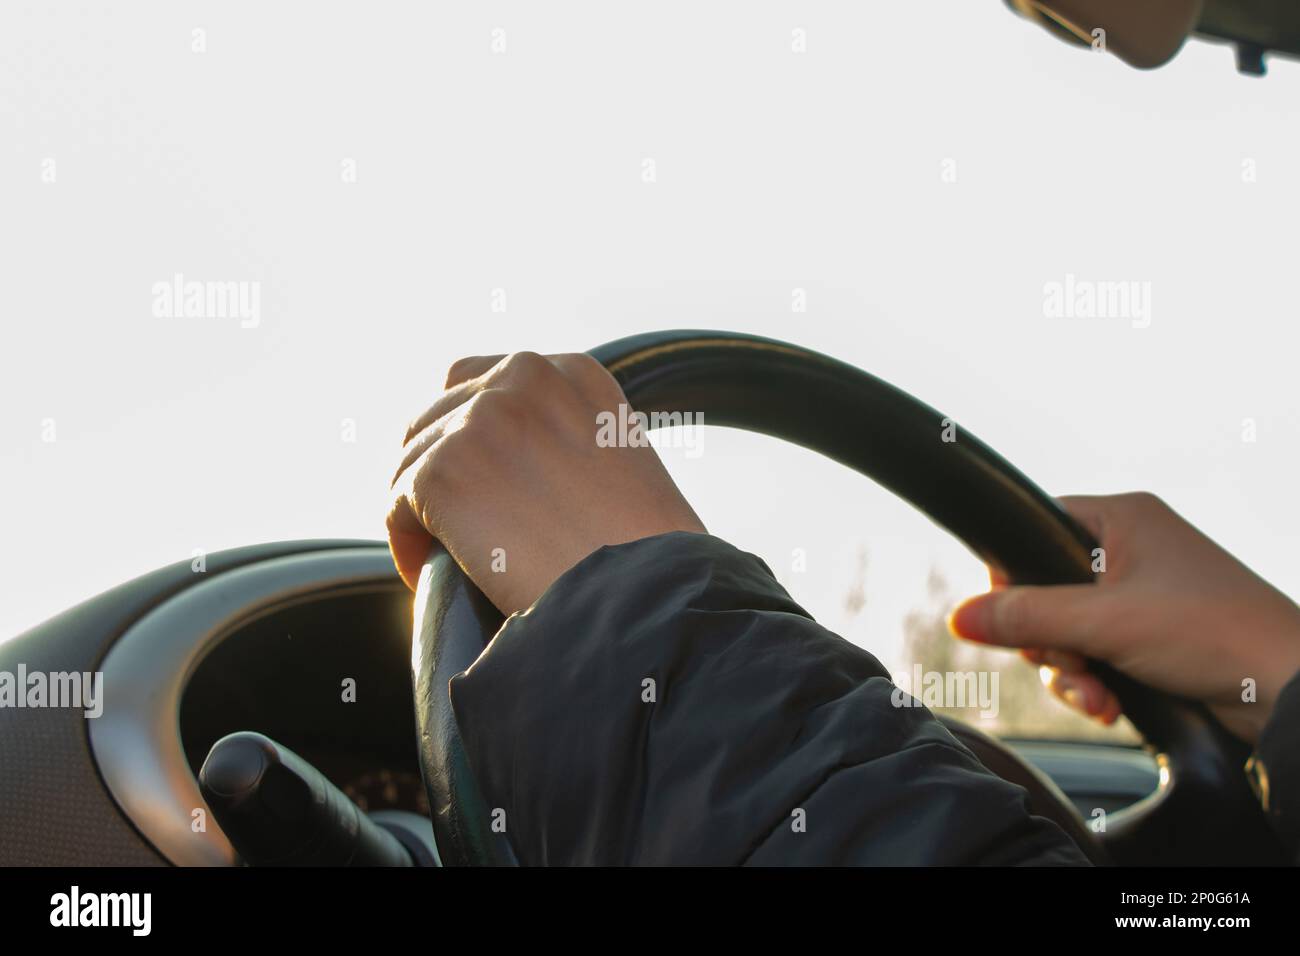 hands on the steering wheel inside the car in the afternoon Stock Photo